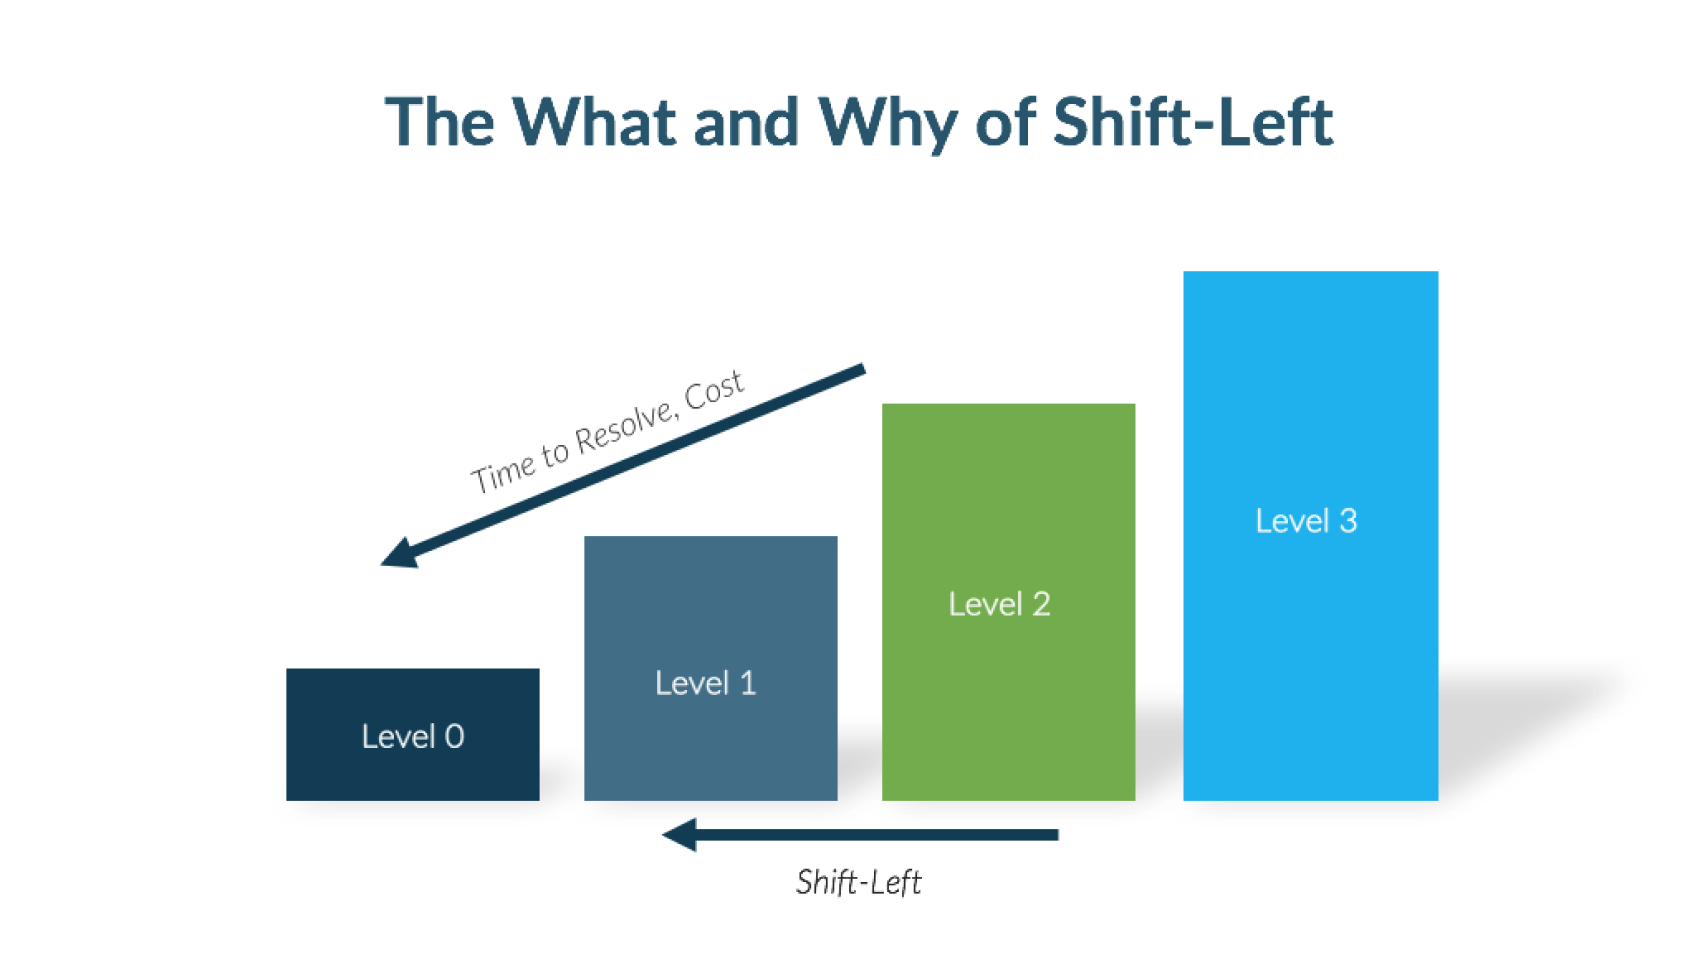 Bar graph showing the what and why of Shift-Left.